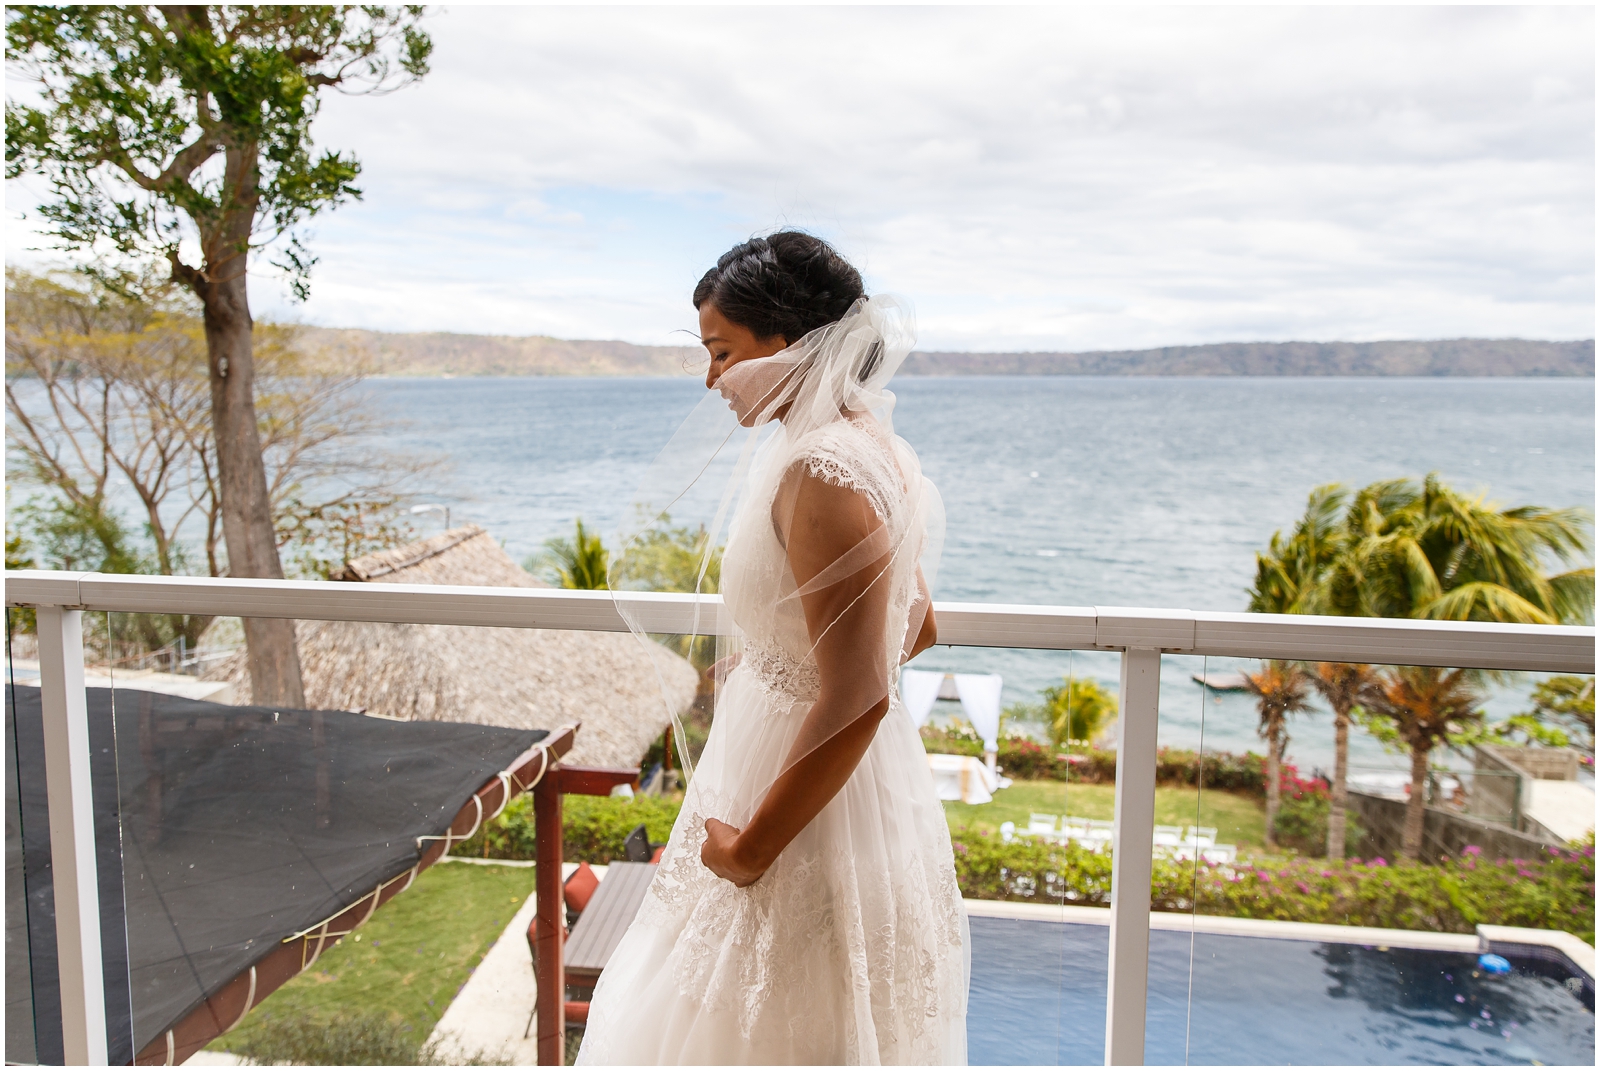 A bride overlooking the lake on her intimate wedding day.